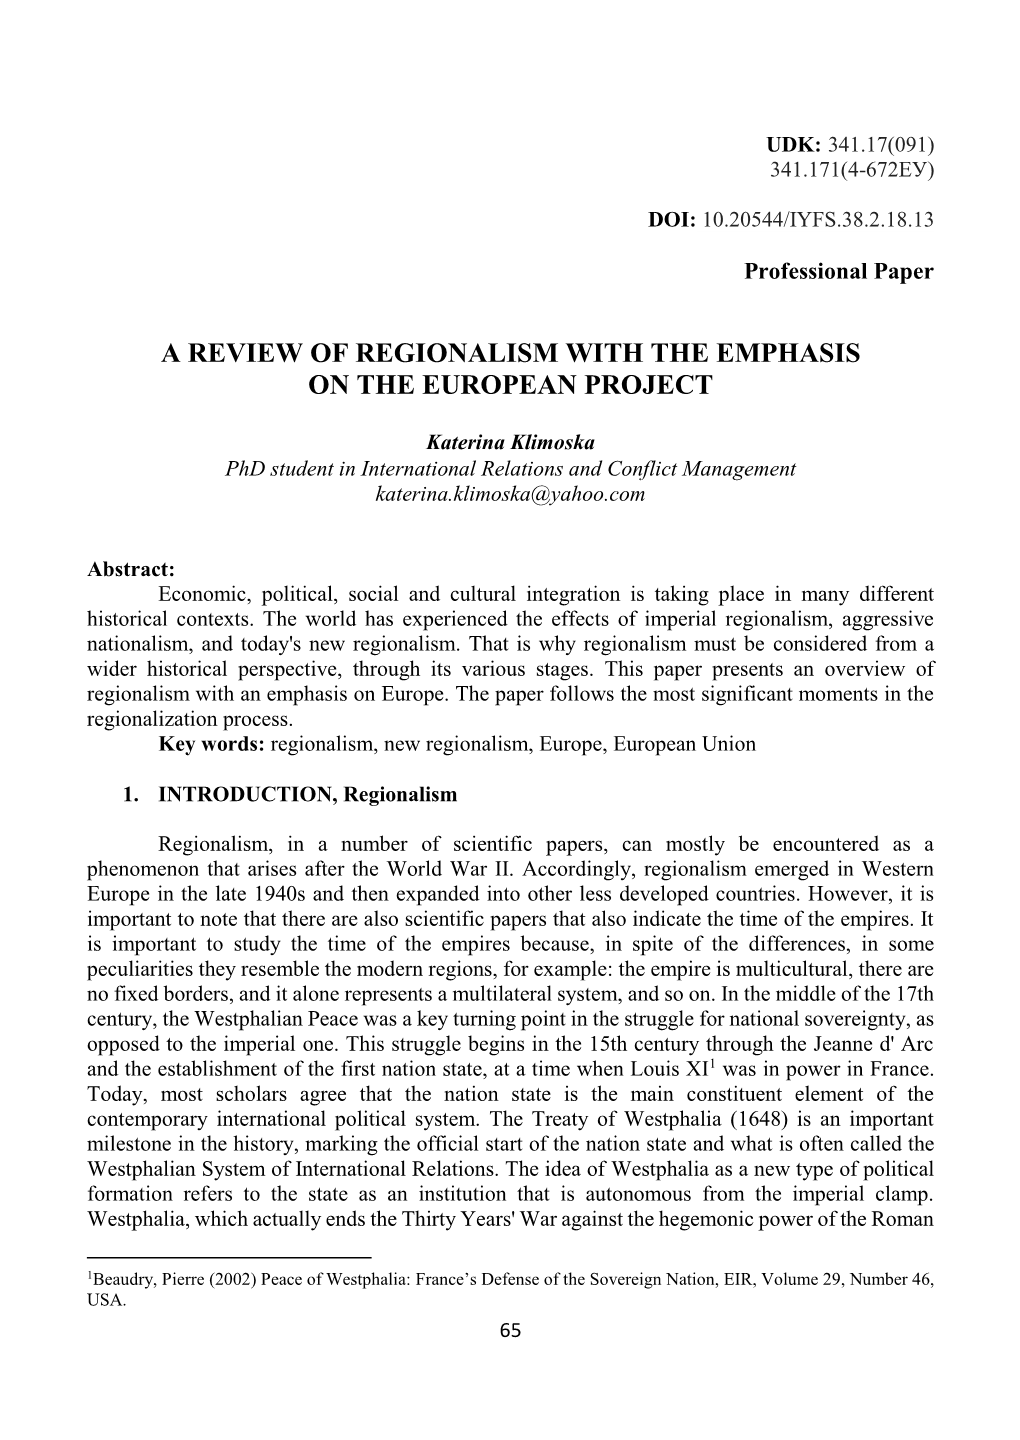 A Review of Regionalism with the Emphasis on the European Project